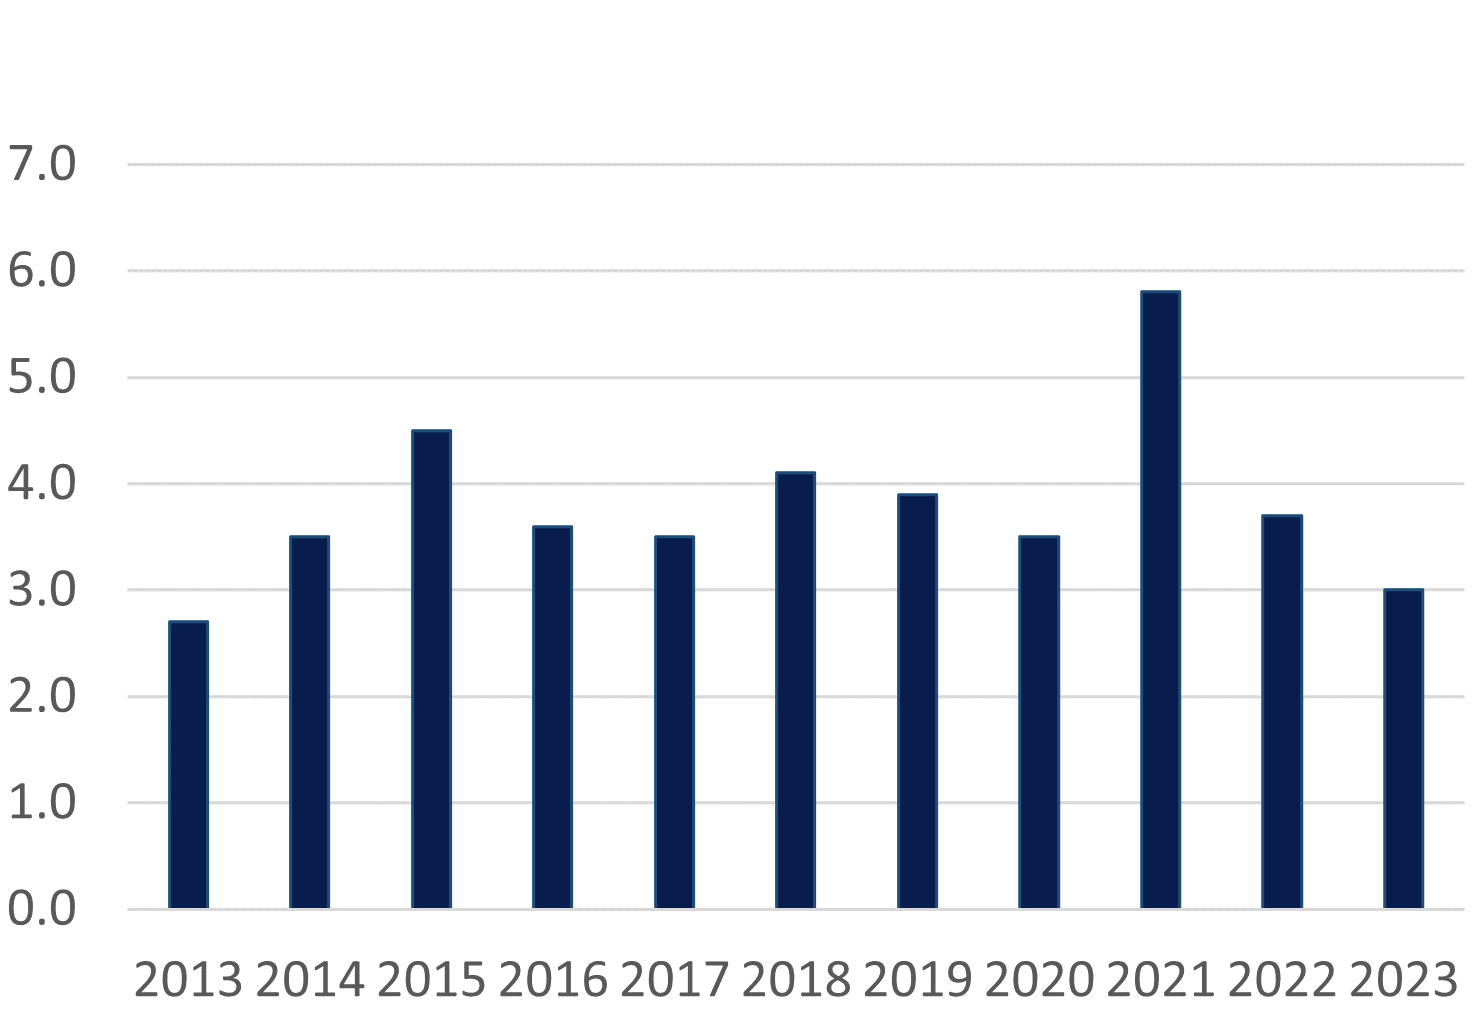 Bar graph of merger and acquisition volume from 2013 to 2023, depicting a potential tailwind developing as described in the preceding paragraph. 